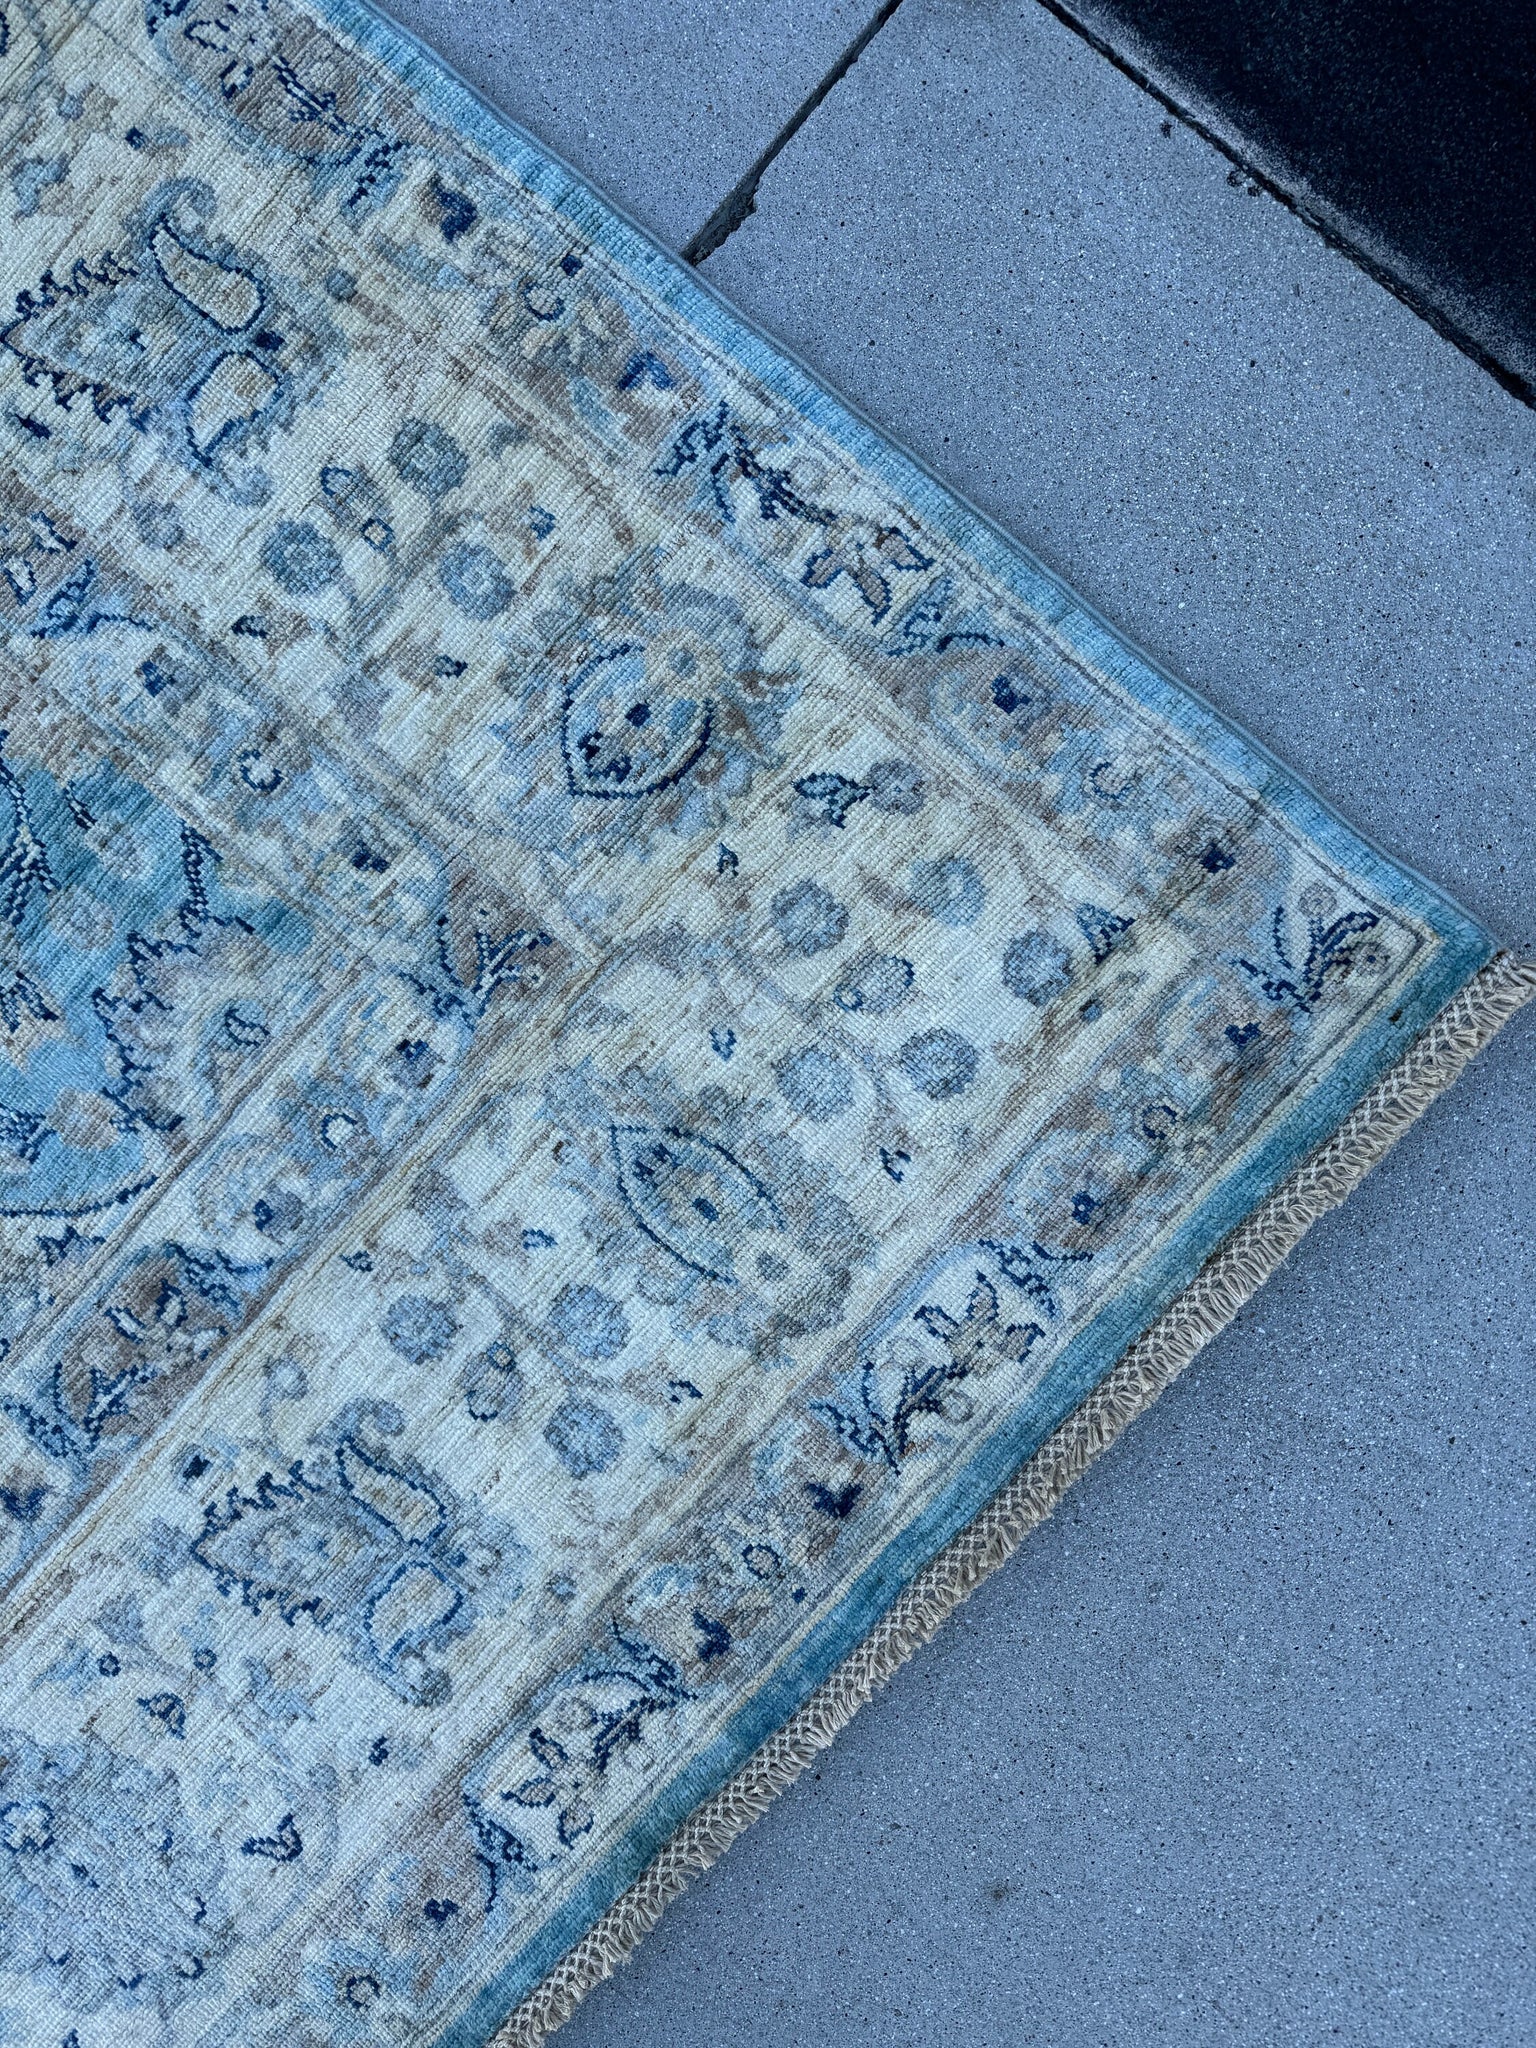 7x10 (213x305) Handmade Afghan Rug | Sky Powder Navy Blue Beige Taupe Cream Grey White | Floral Wool Hand-Knotted